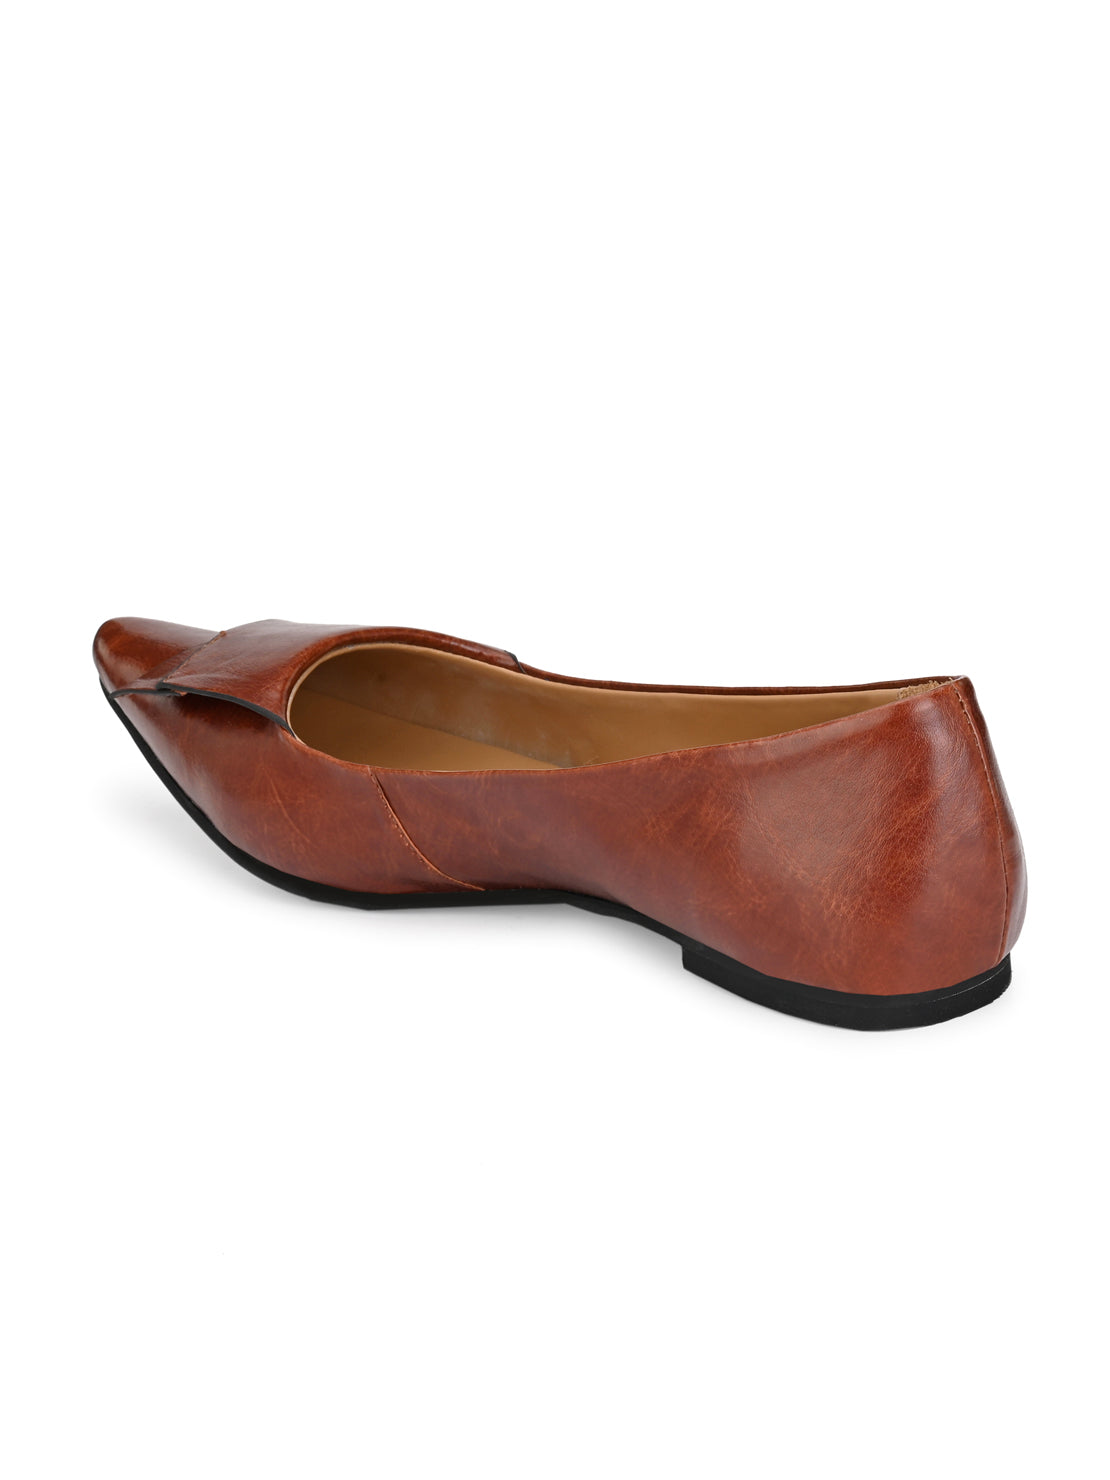 Aady Austin Women Brown Pointed Toe Flats Belly (AUSF19075)